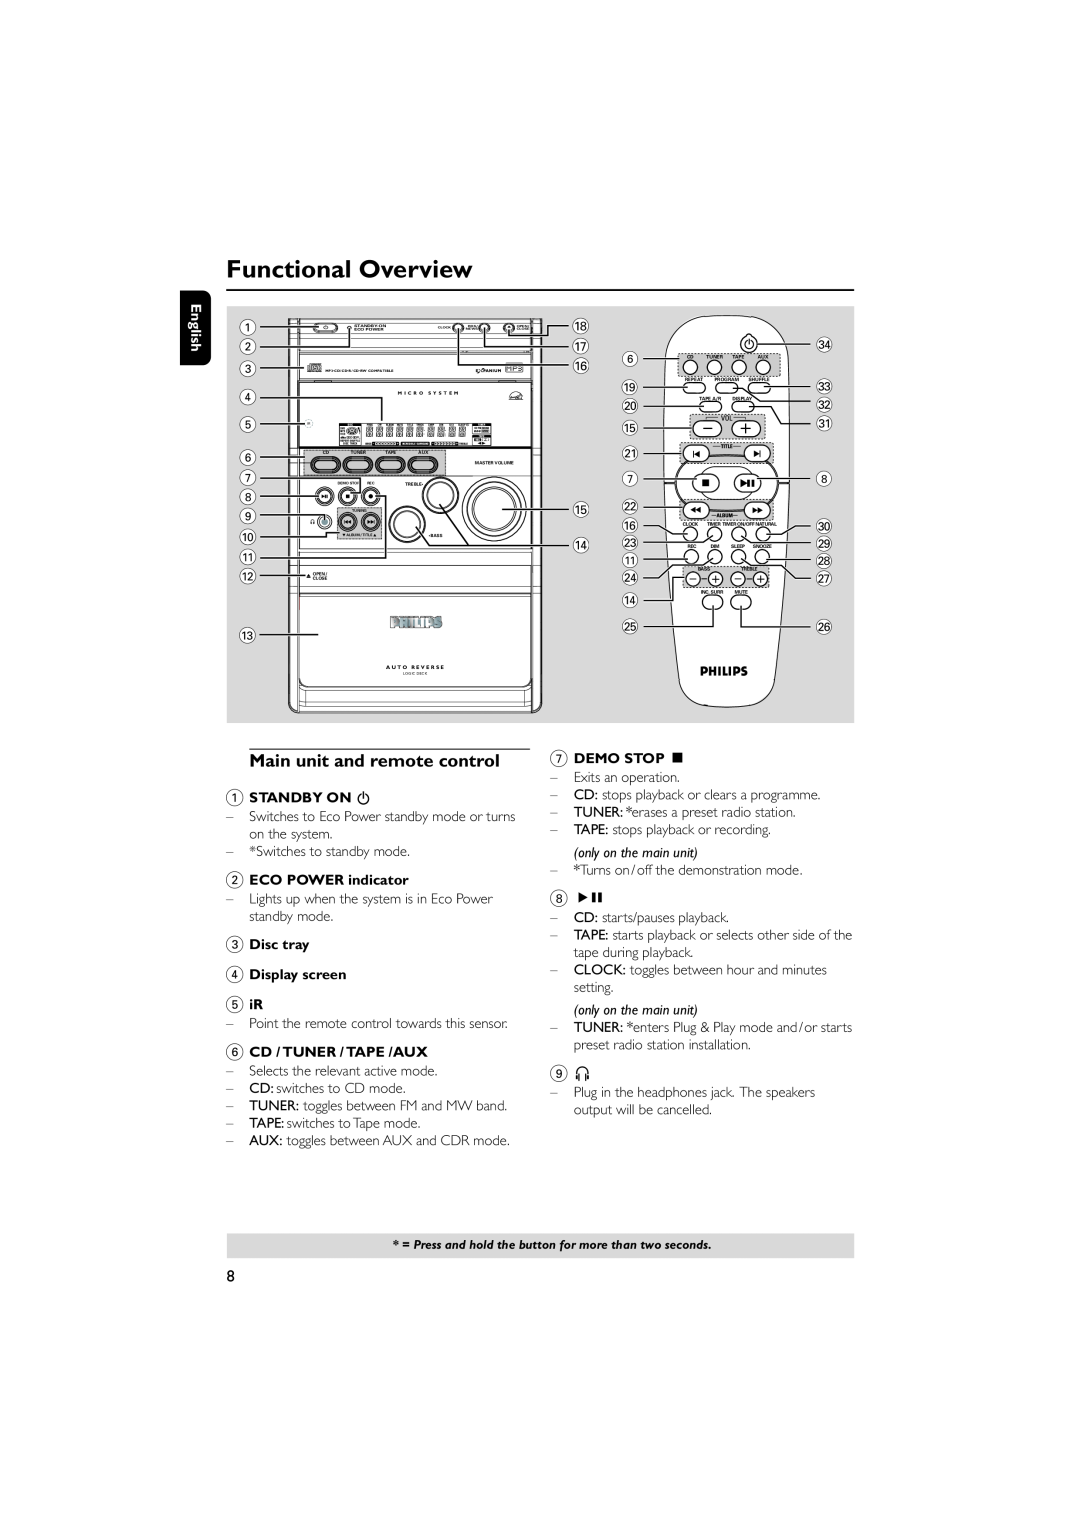 Philips MCM5 user manual Functional Overview, Main unit and remote control 